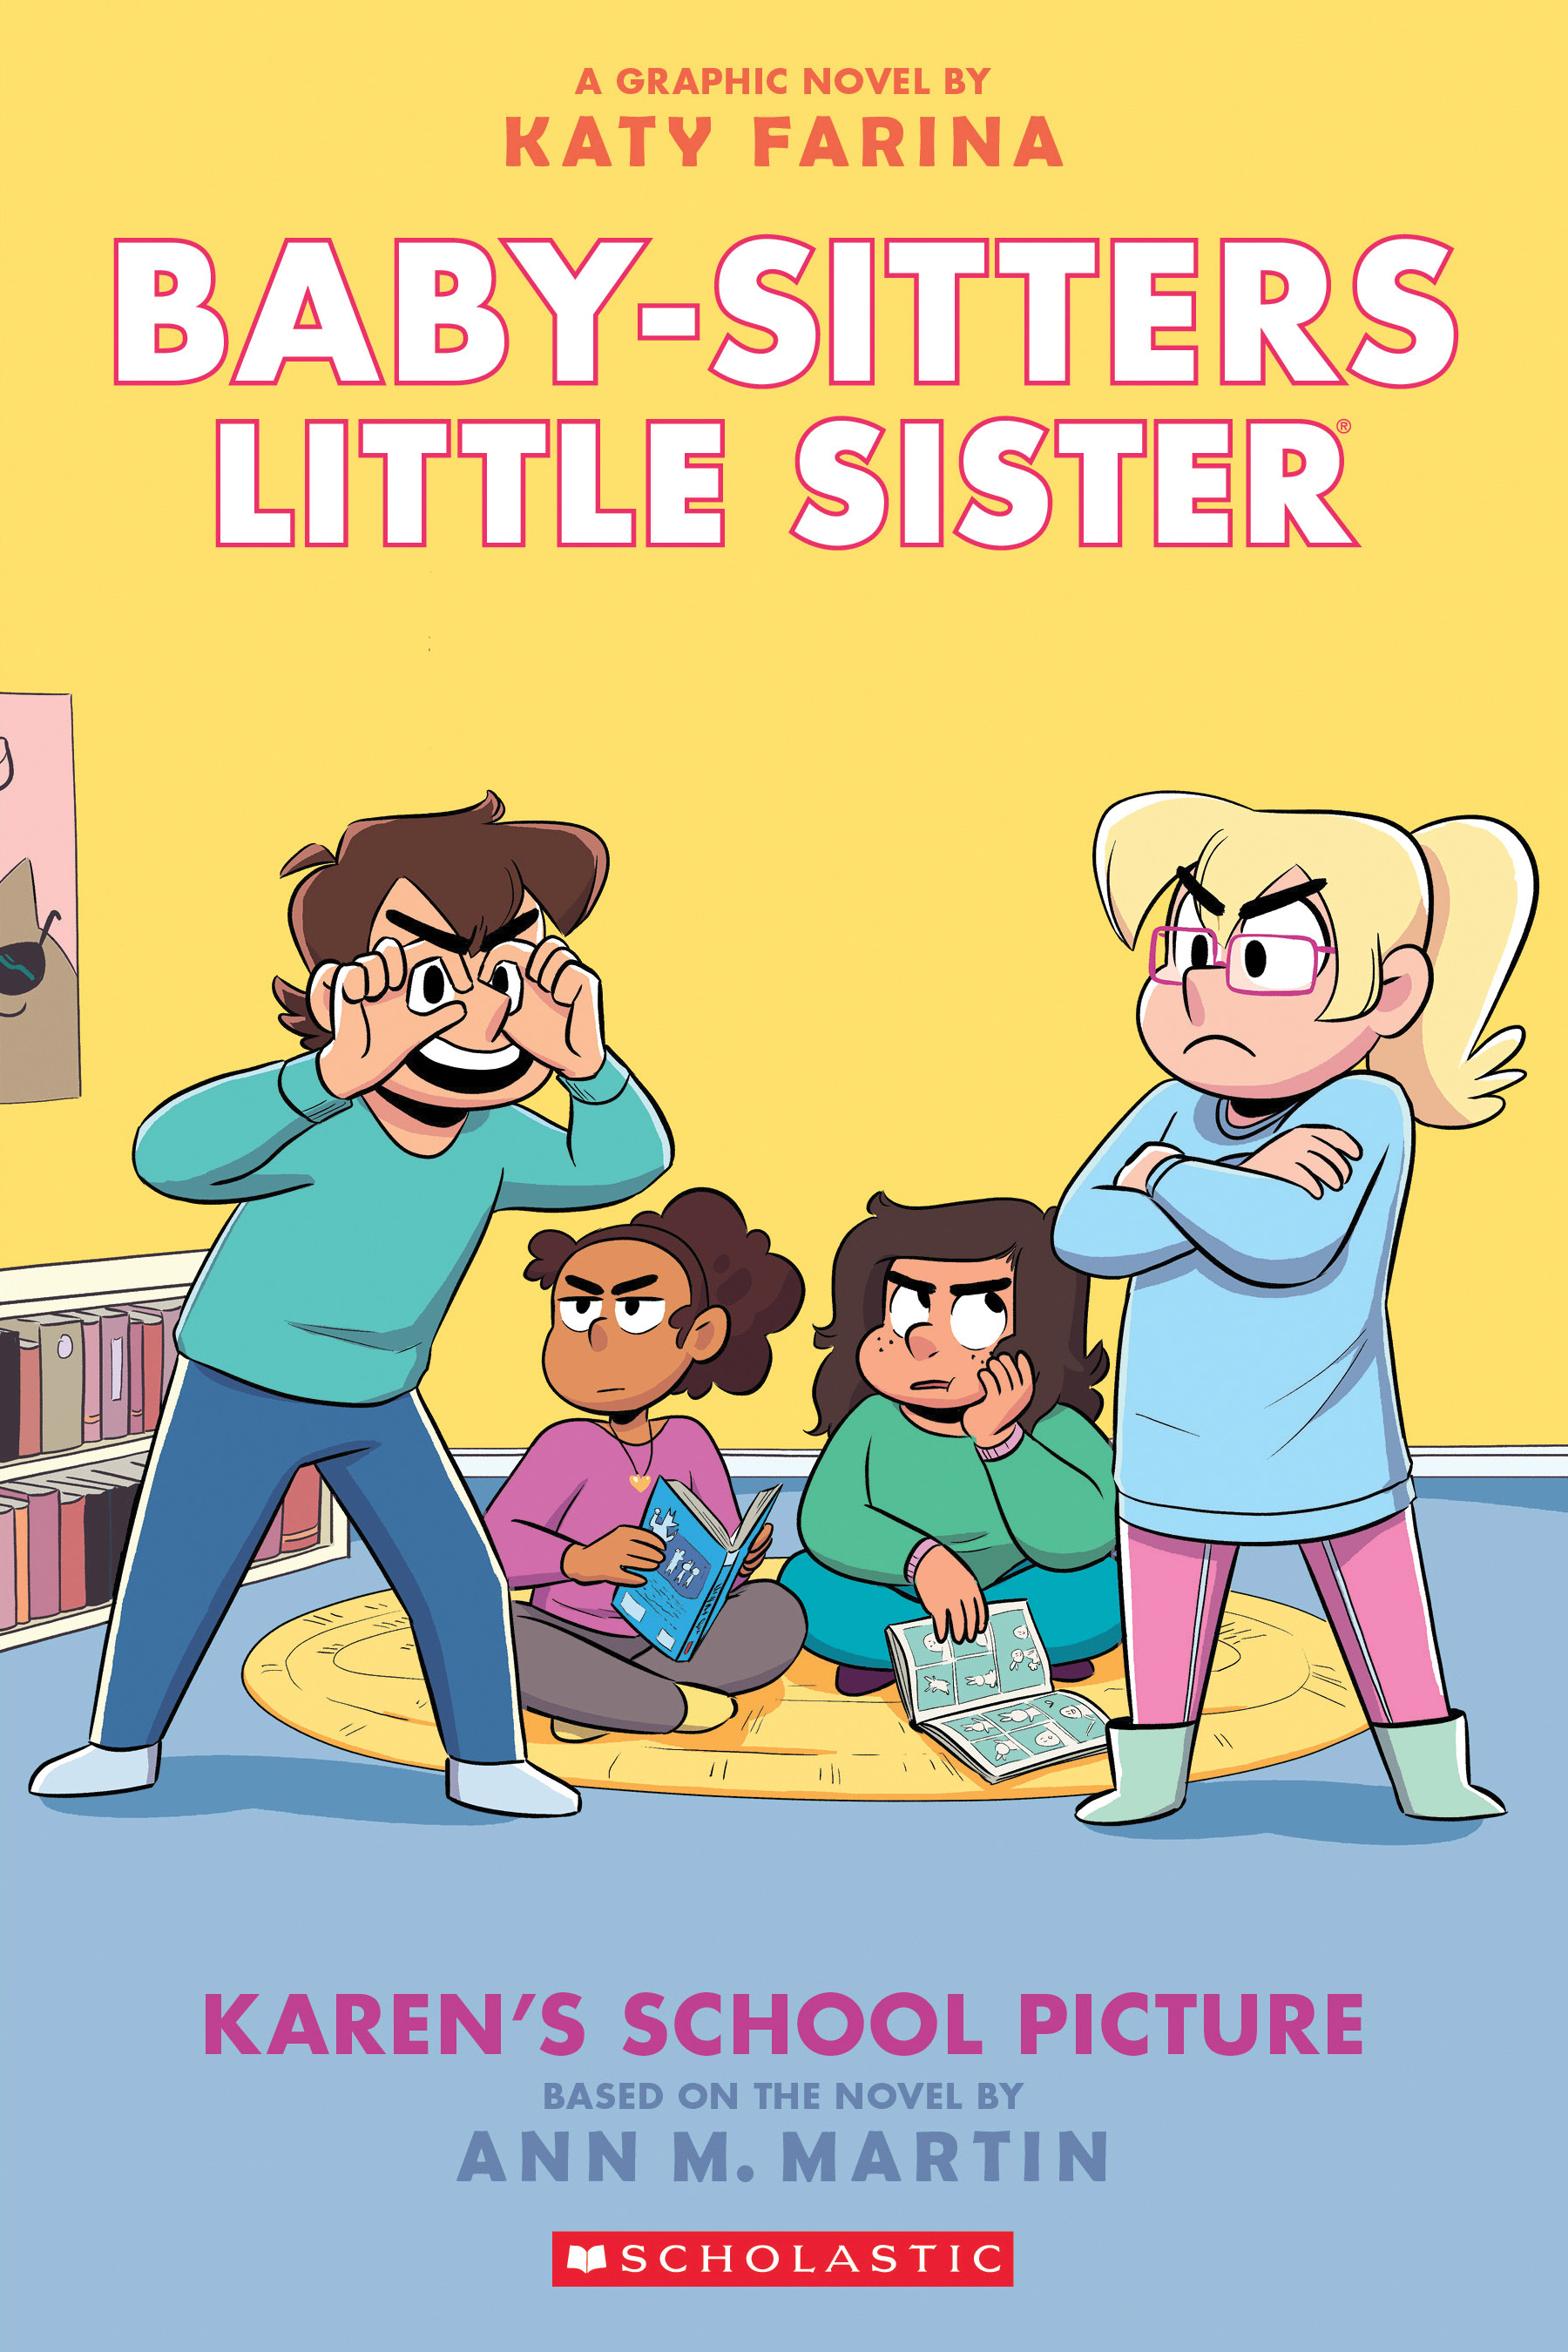 Karen's School Picture: A Graphic Novel (Baby-sitters Little Sister #5) (Adapted edition) cover image